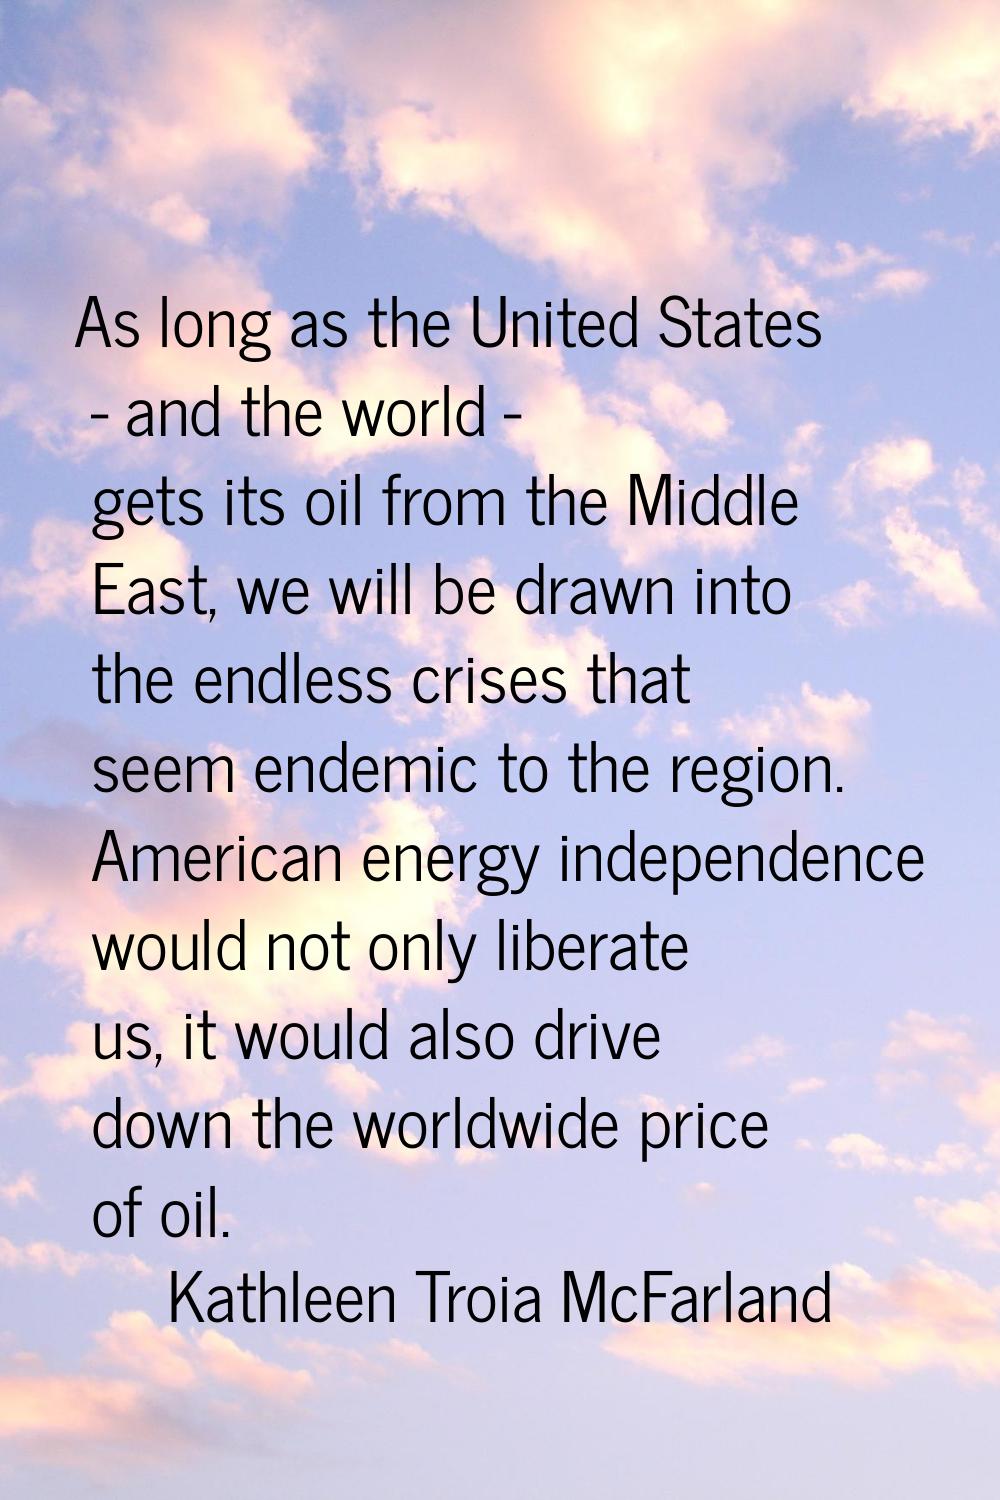 As long as the United States - and the world - gets its oil from the Middle East, we will be drawn 